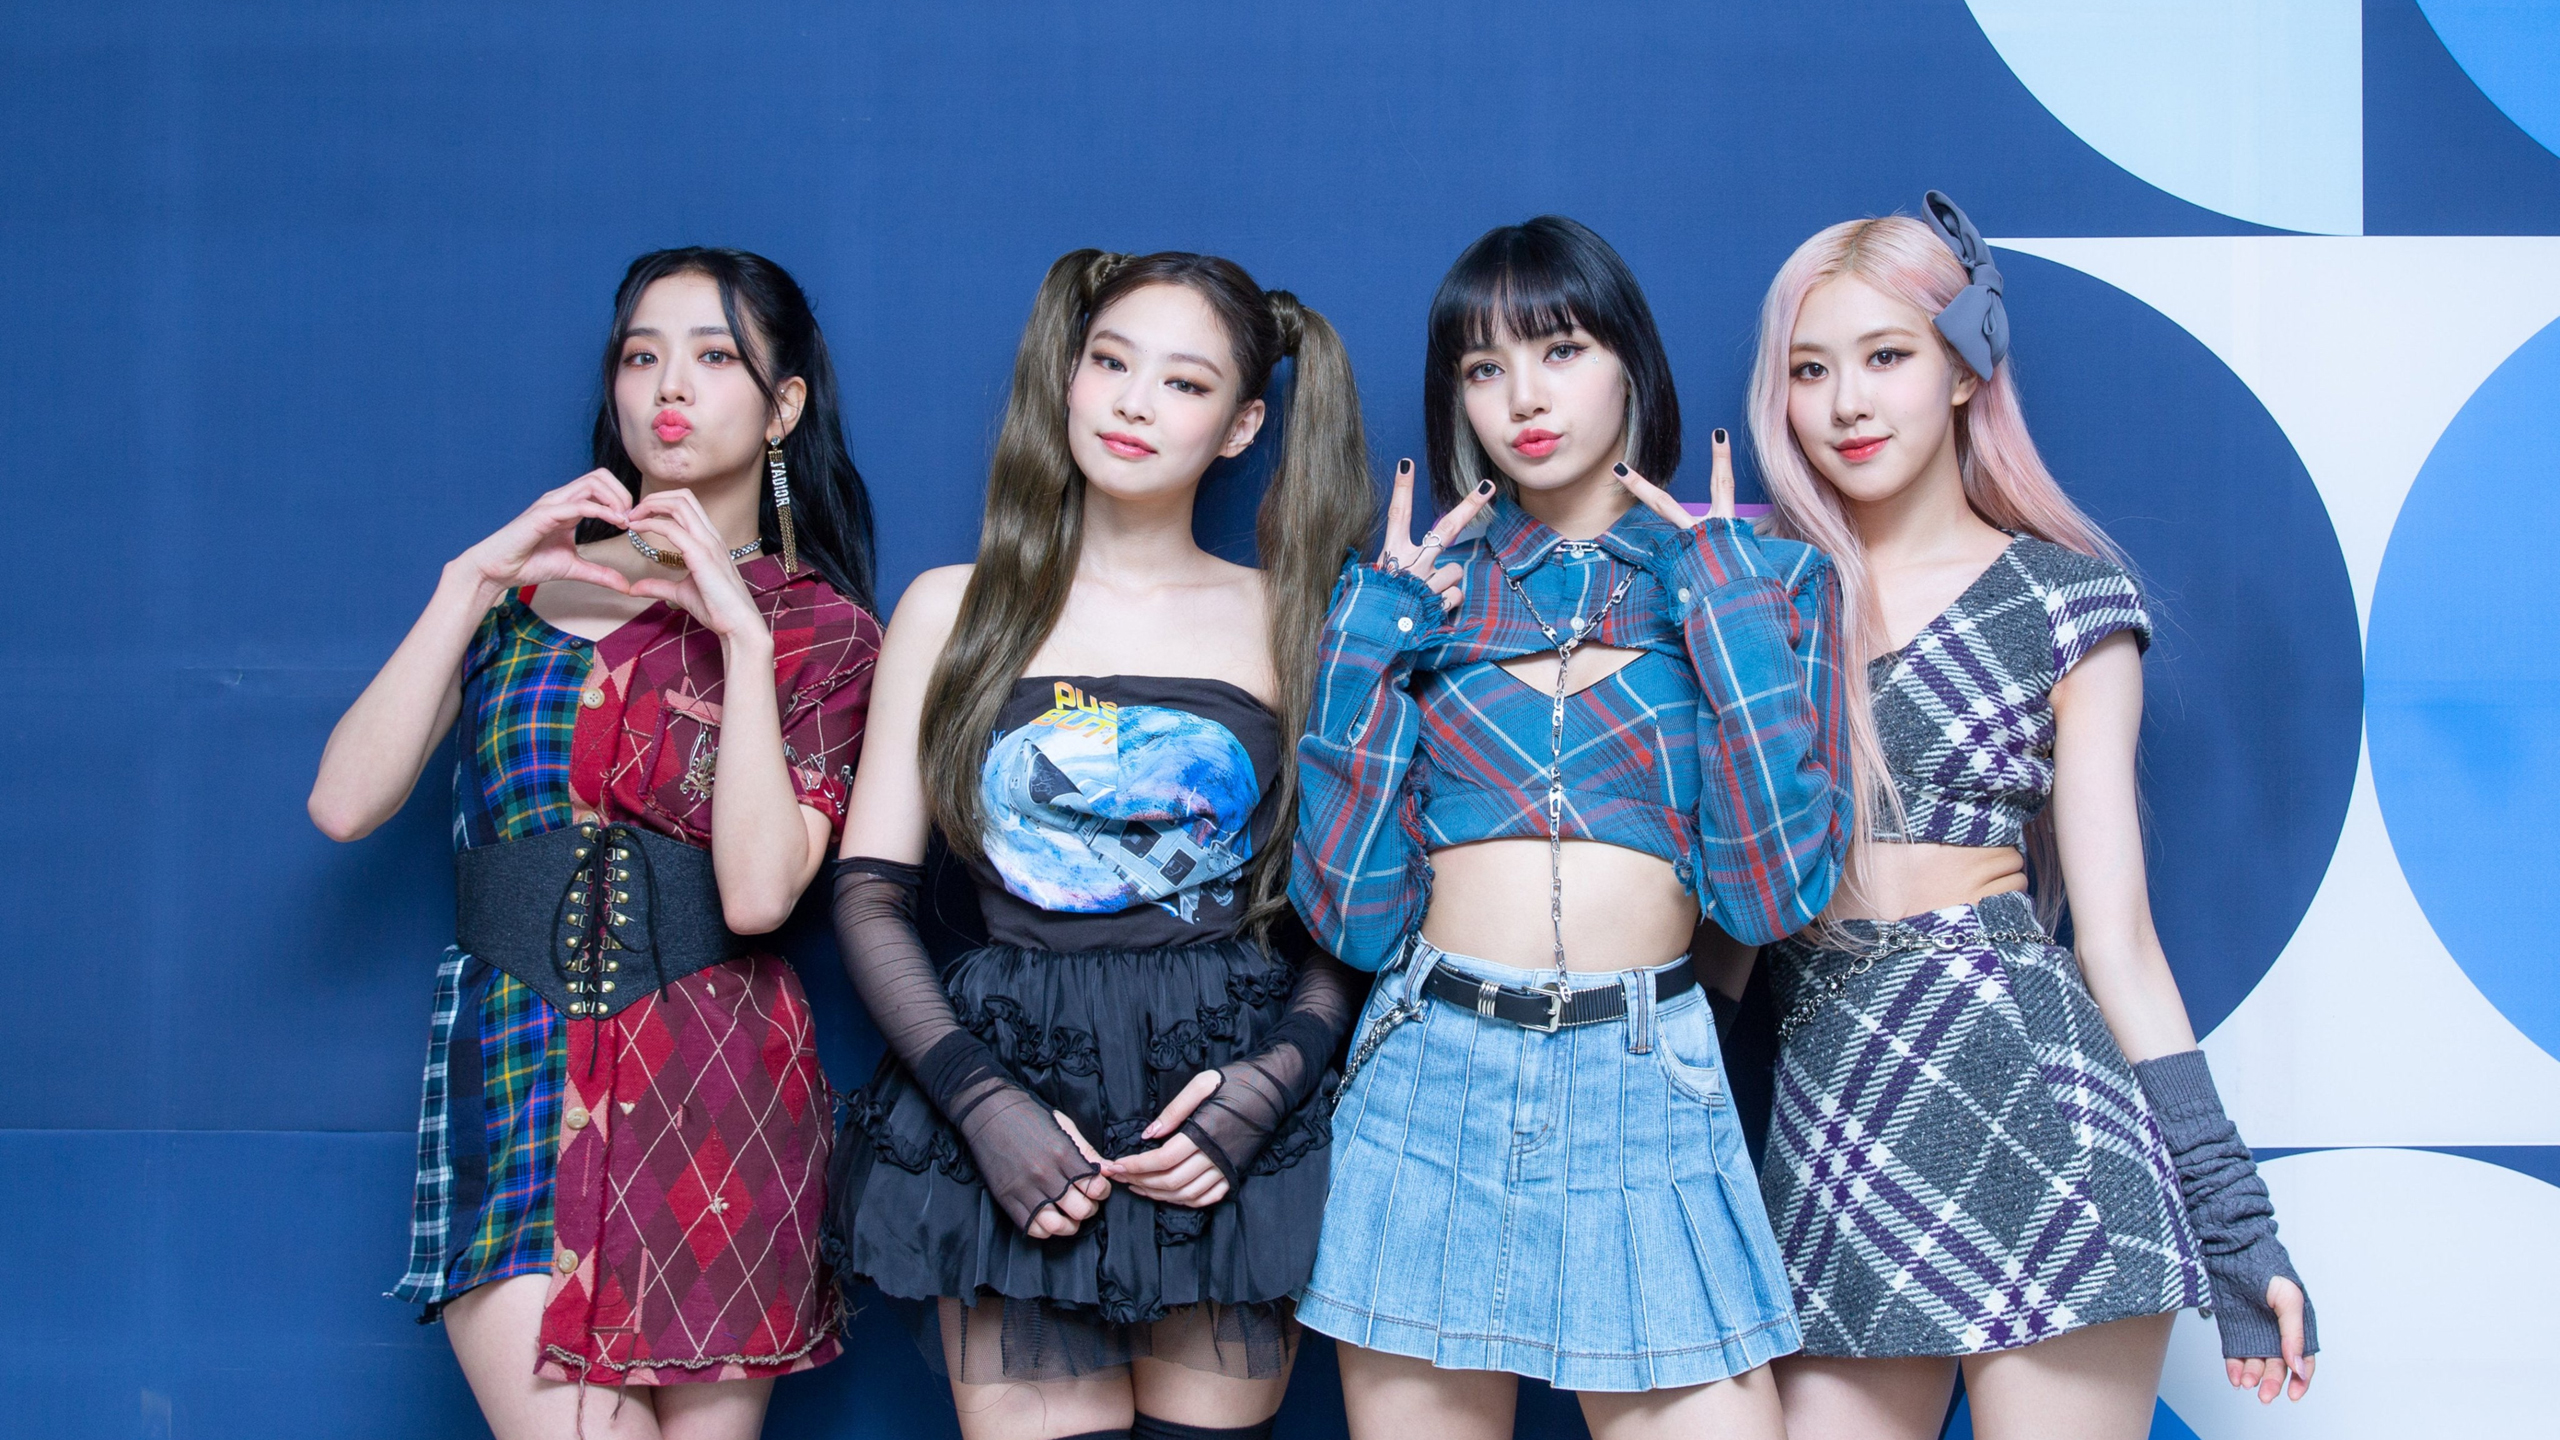 BLACKPINK Rose: The K-pop star's most iconic fashion moments